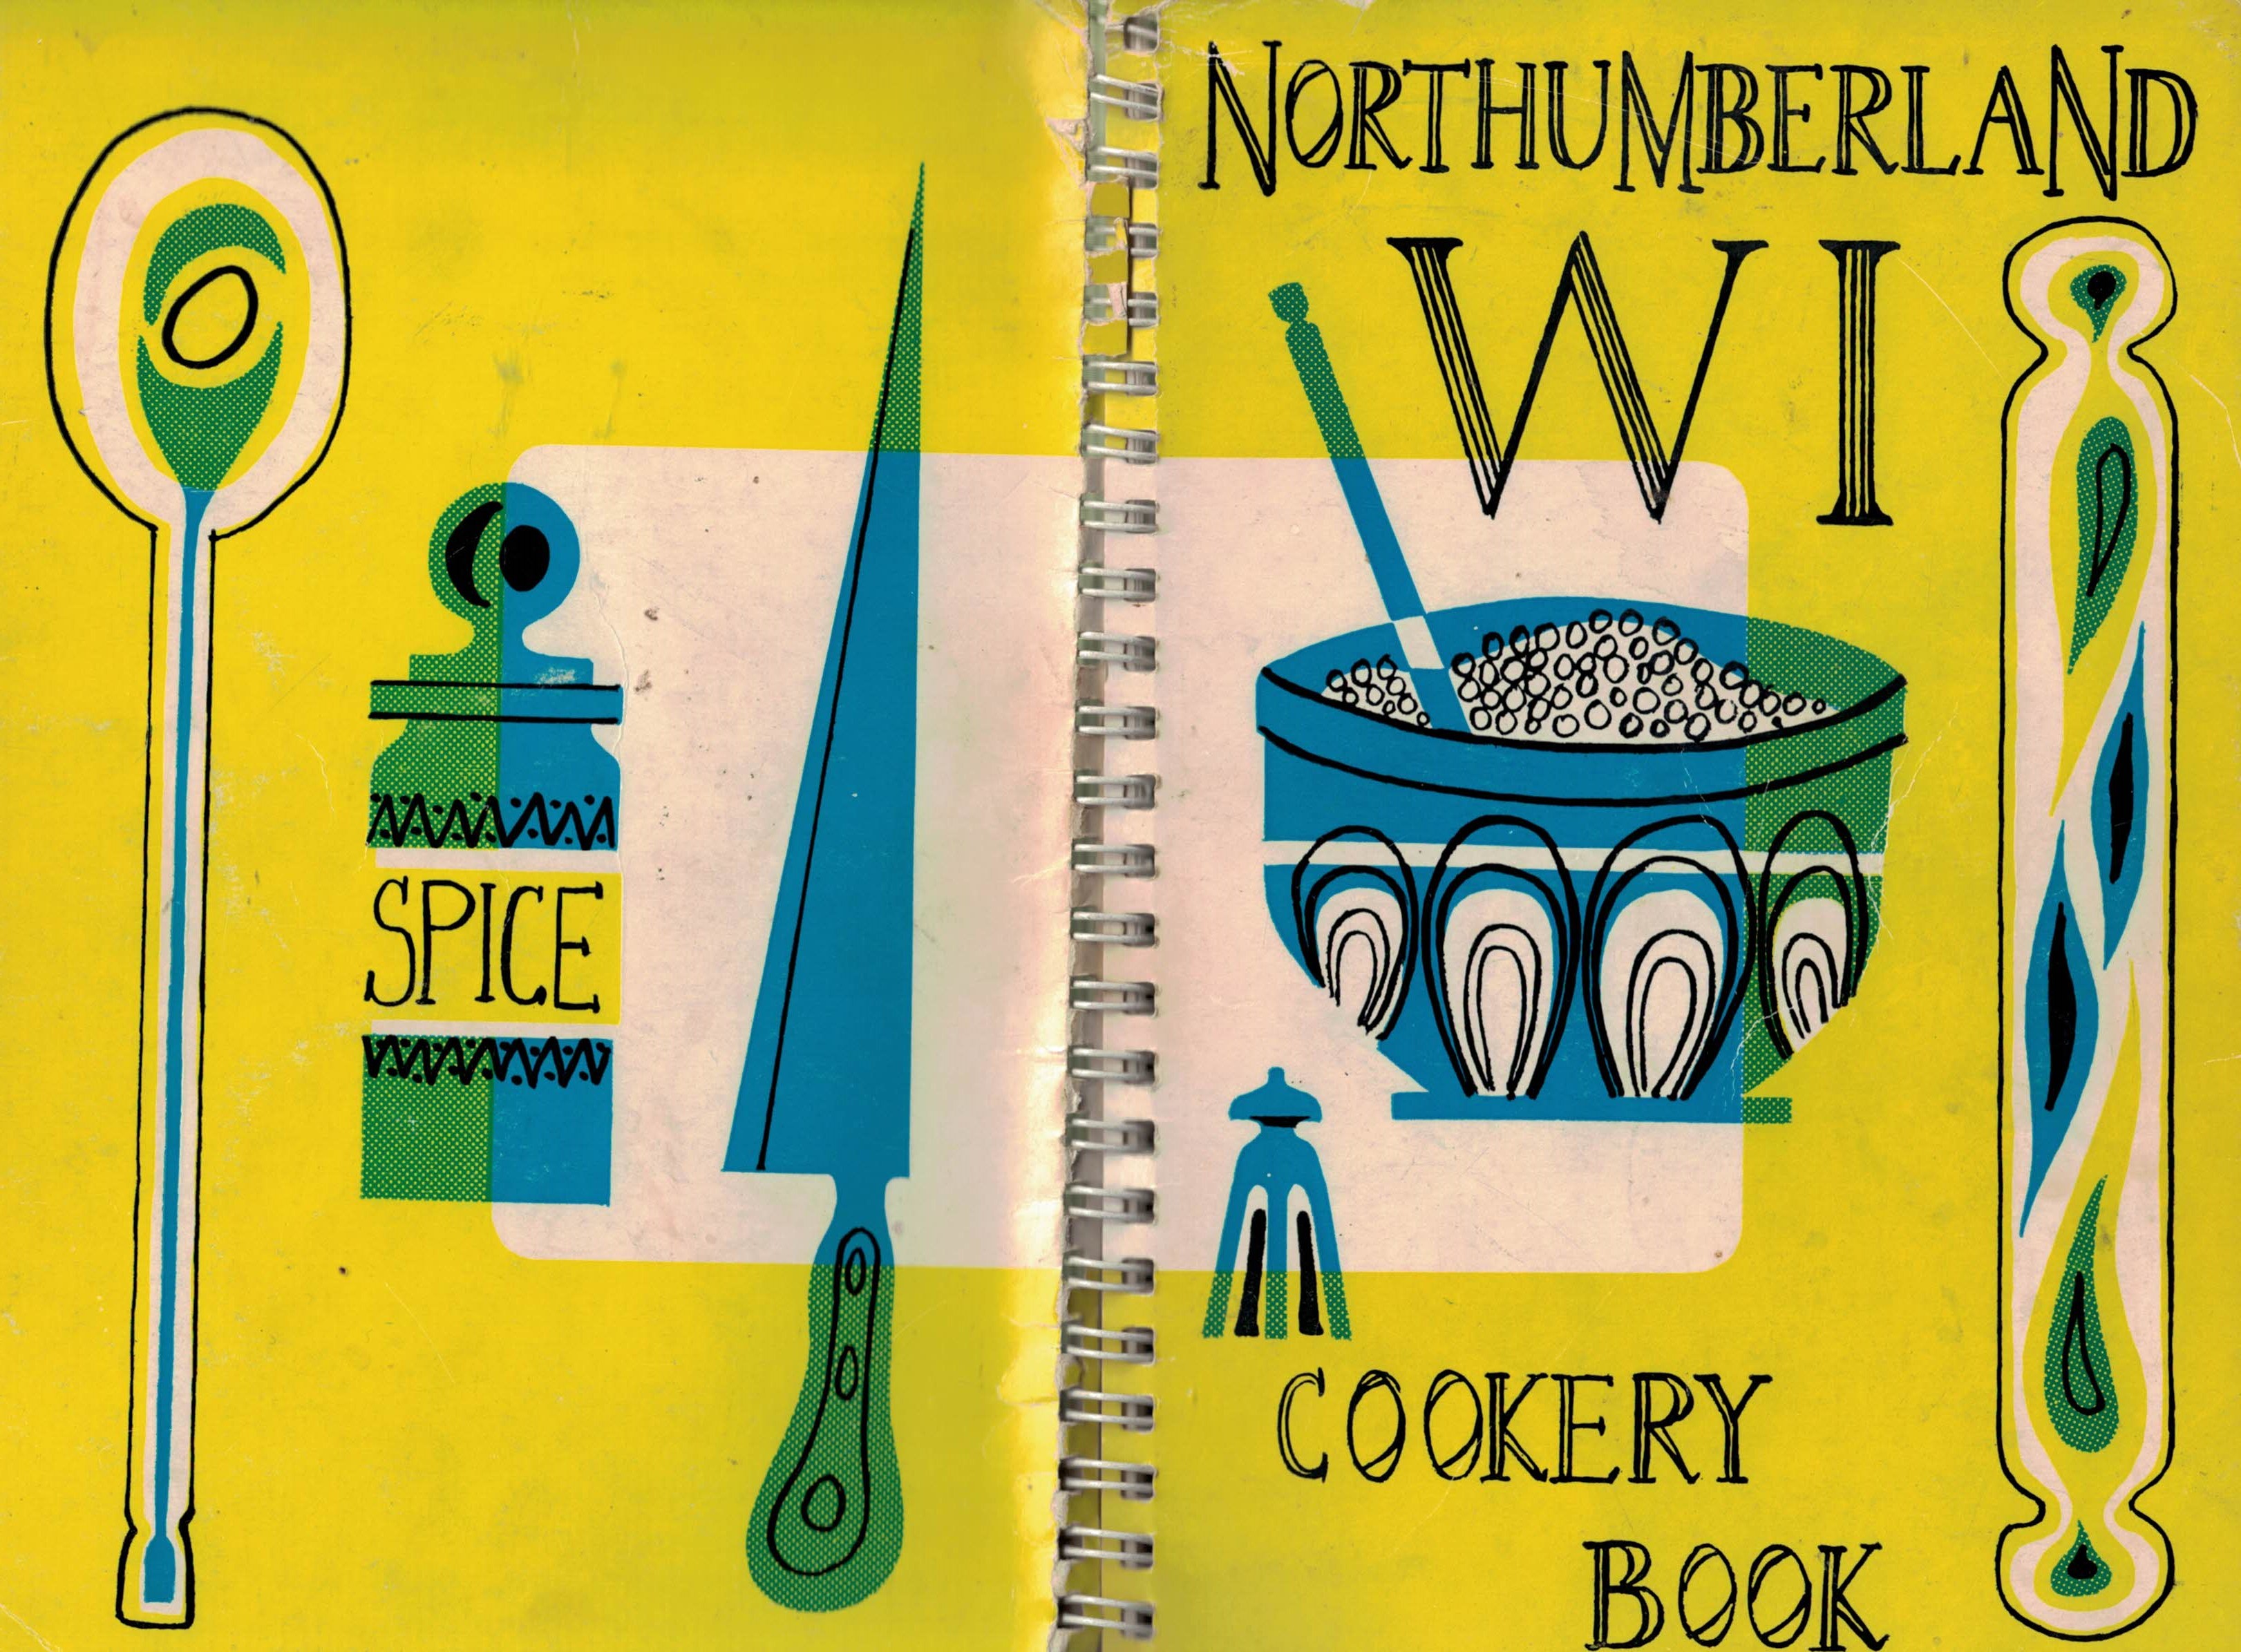 Cookery Book. Northumberland Federation of Women's Institutes. 1969.